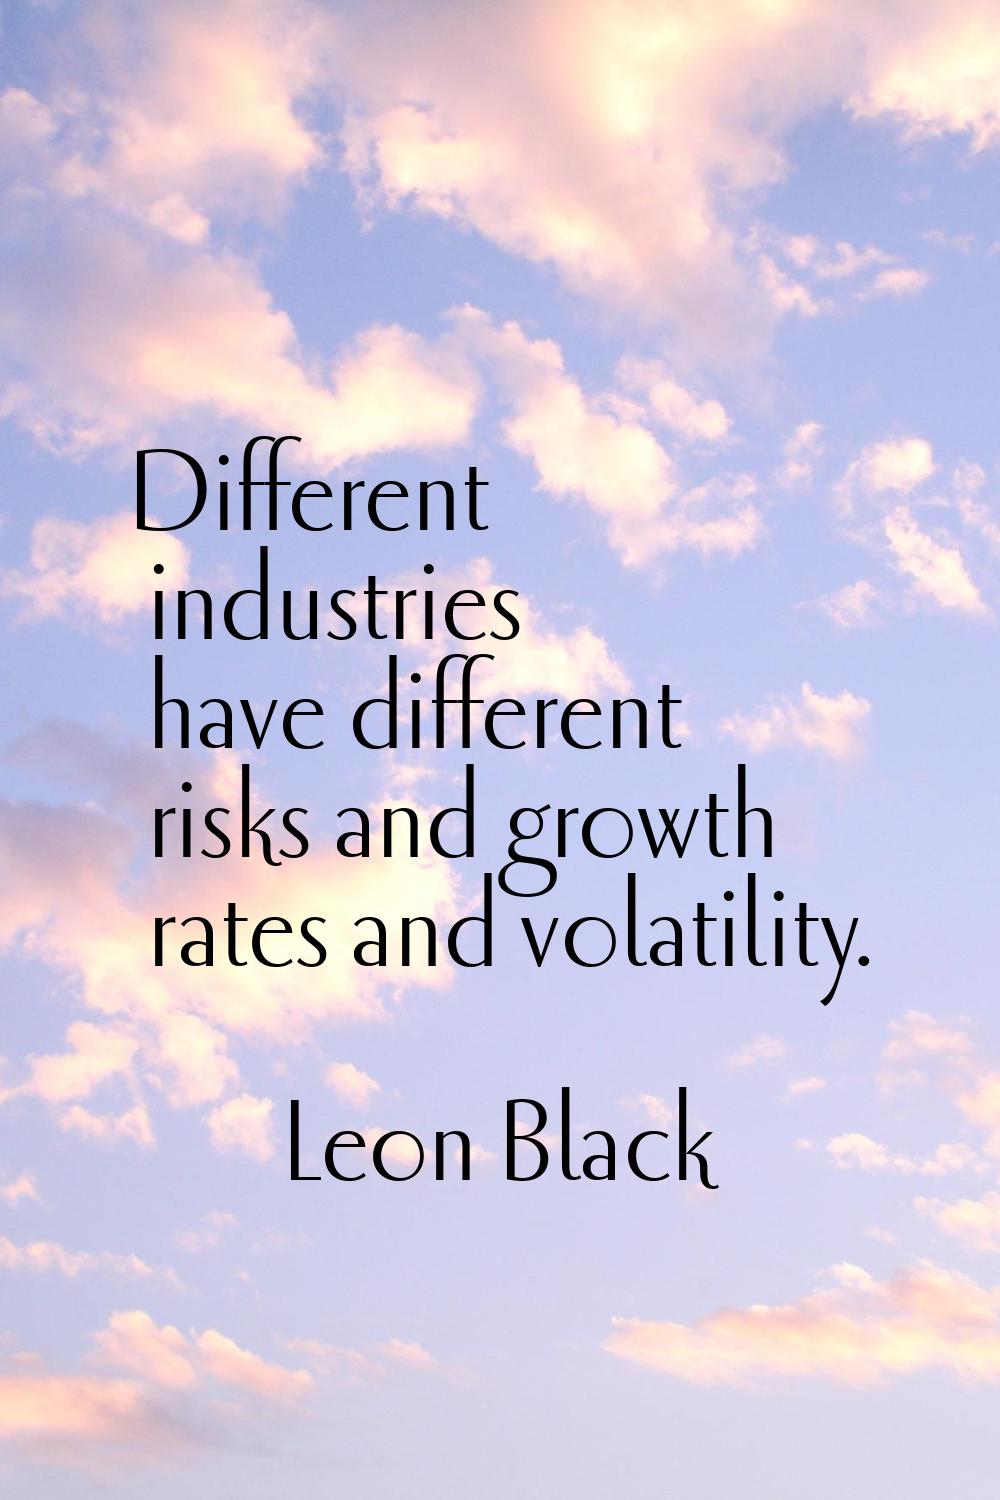 Different industries have different risks and growth rates and volatility.